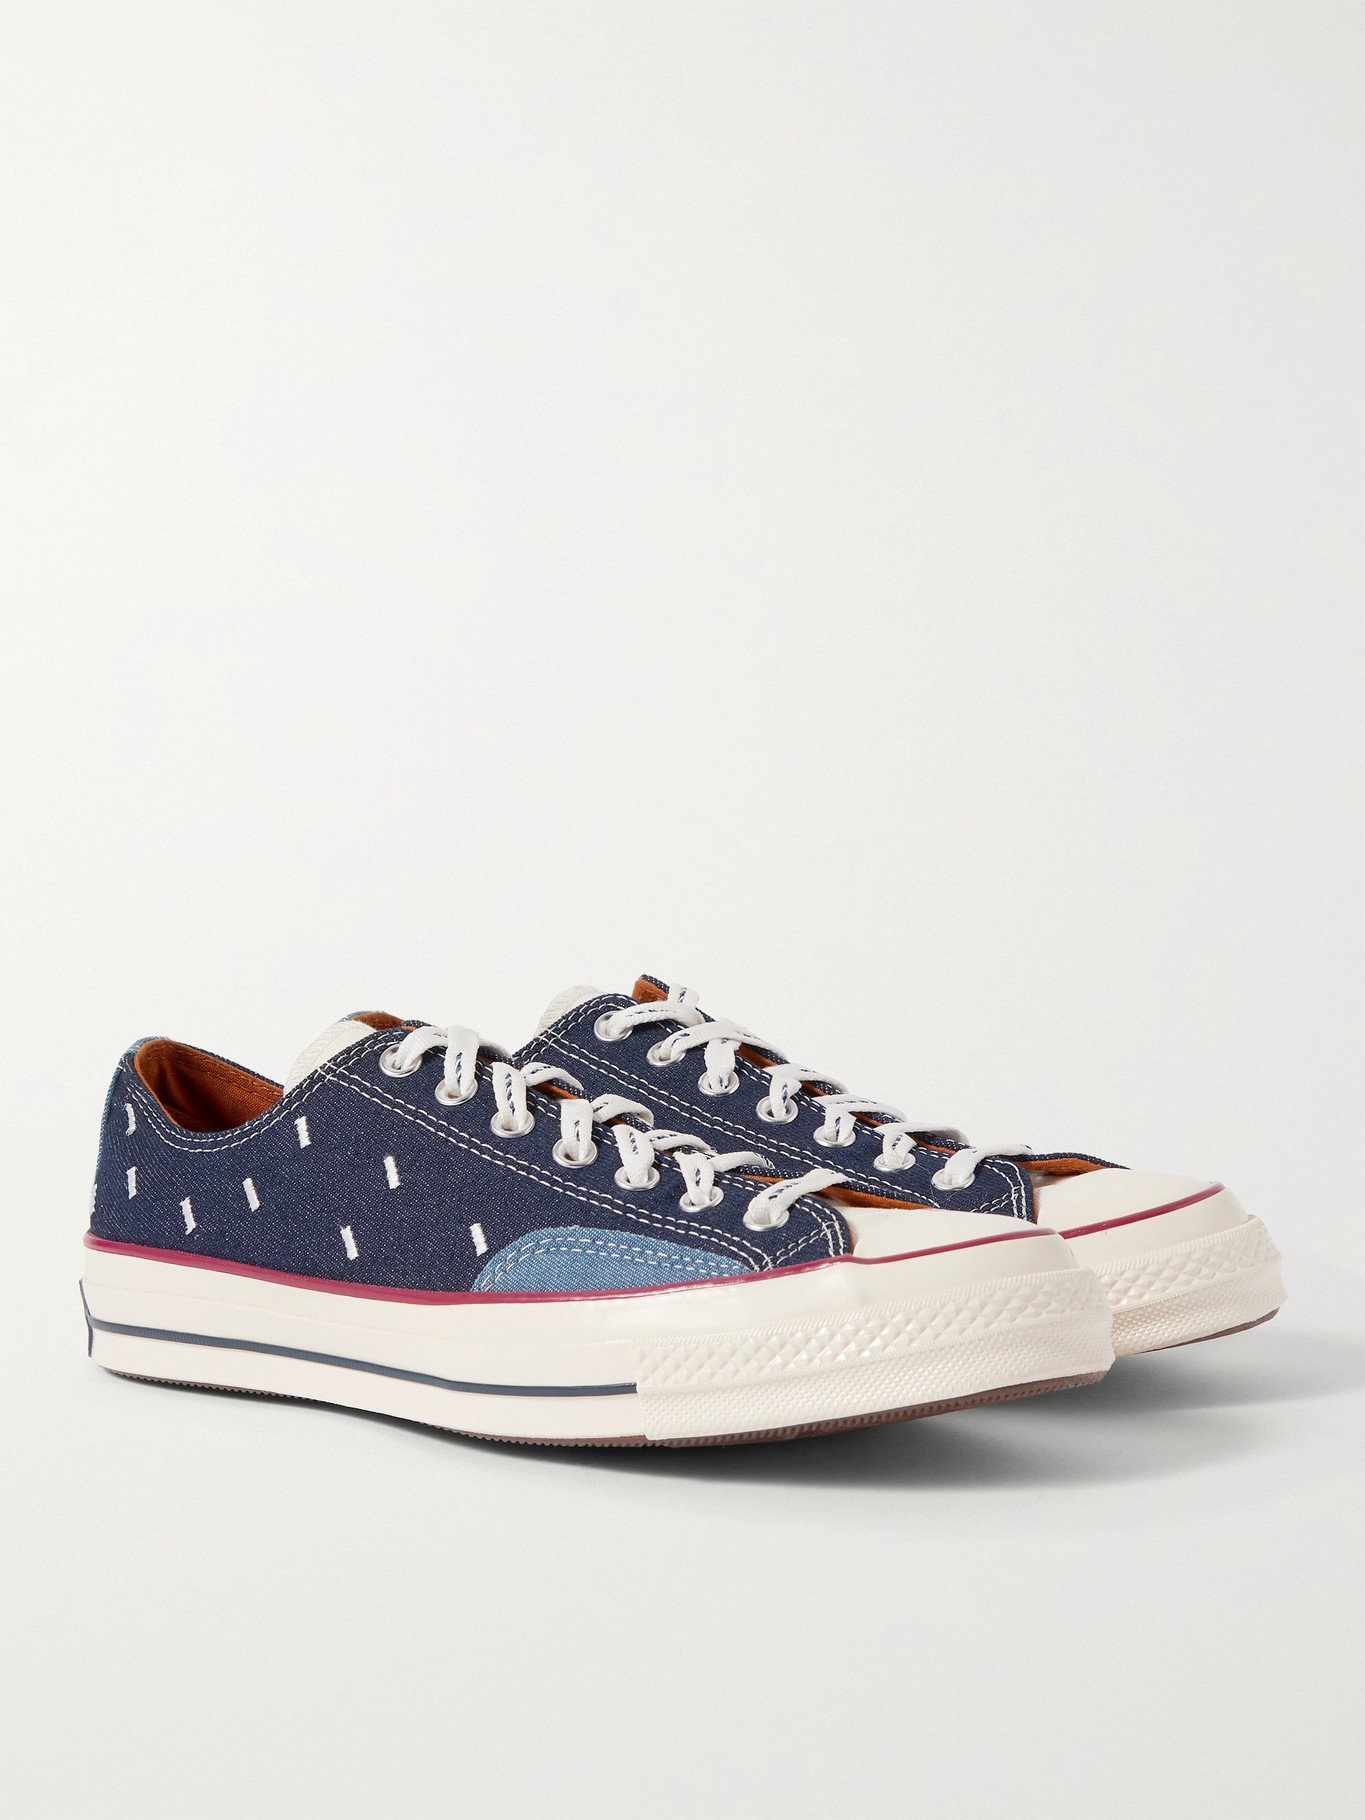 CONVERSE - Chuck 70 OX Embroidered Denim and Canvas Sneakers - Blue Converse